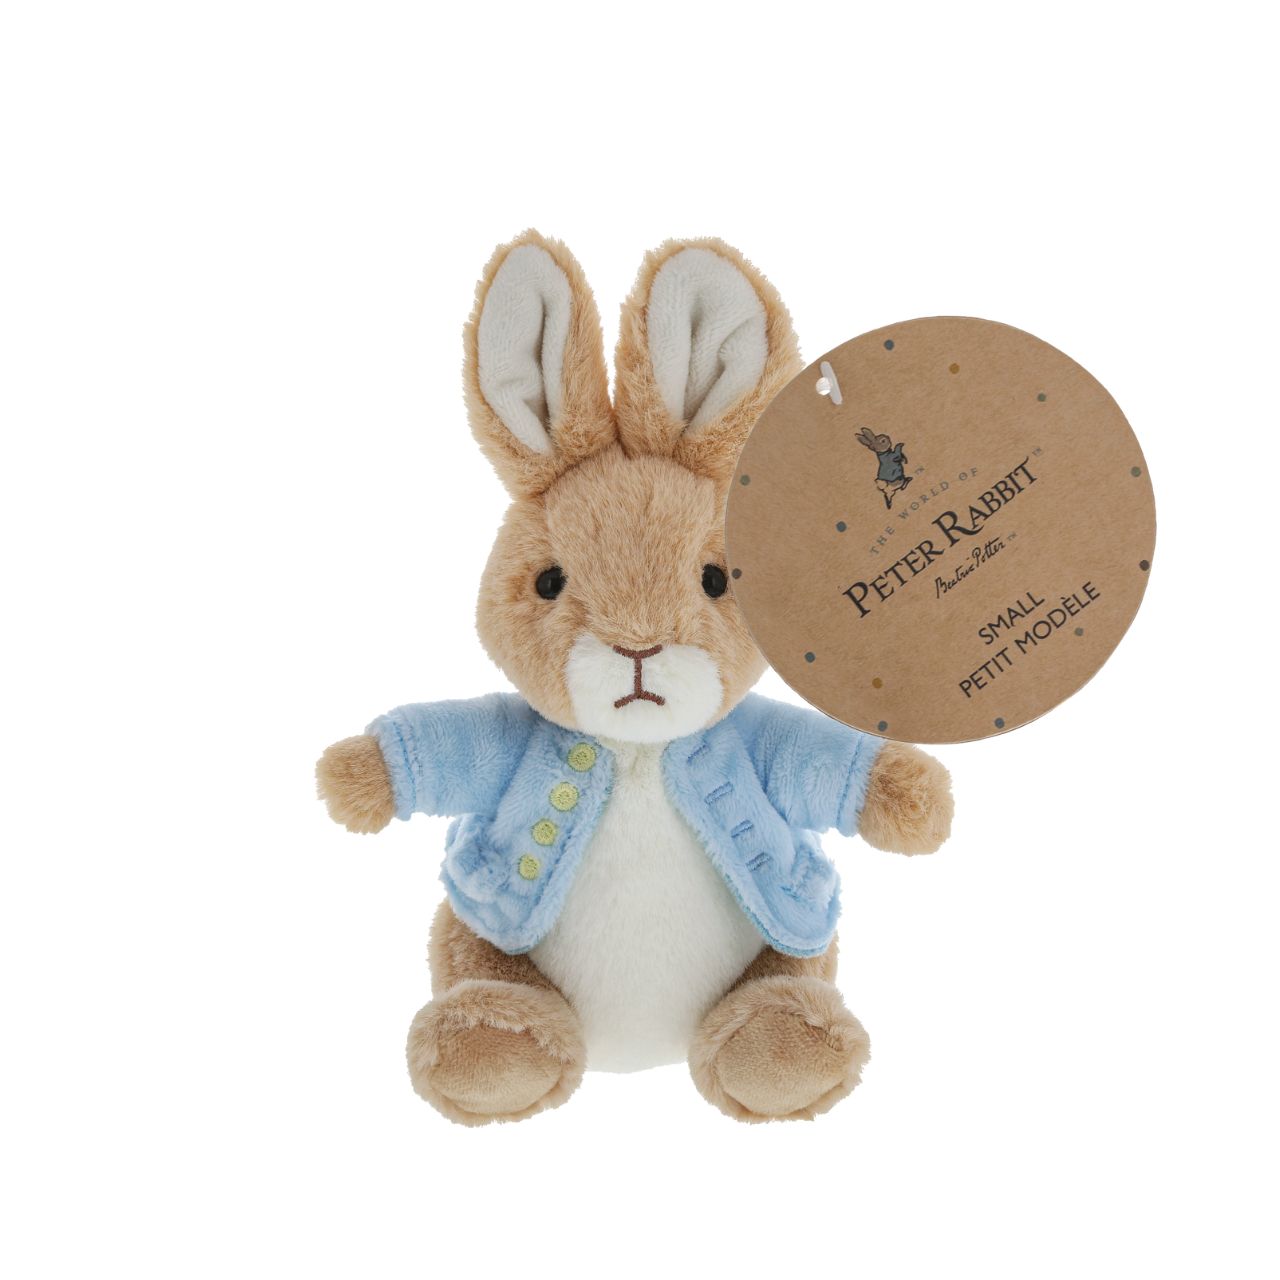 This Peter Rabbit soft toy is made from beautifully soft fabric and is dressed in clothing exactly as illustrated by Beatrix Potter, with his signature blue jacket. The Peter Rabbit collection features the much loved characters from the Beatrix Potter books and this quality and authentic soft toy is sure to be adored for many years to come. 